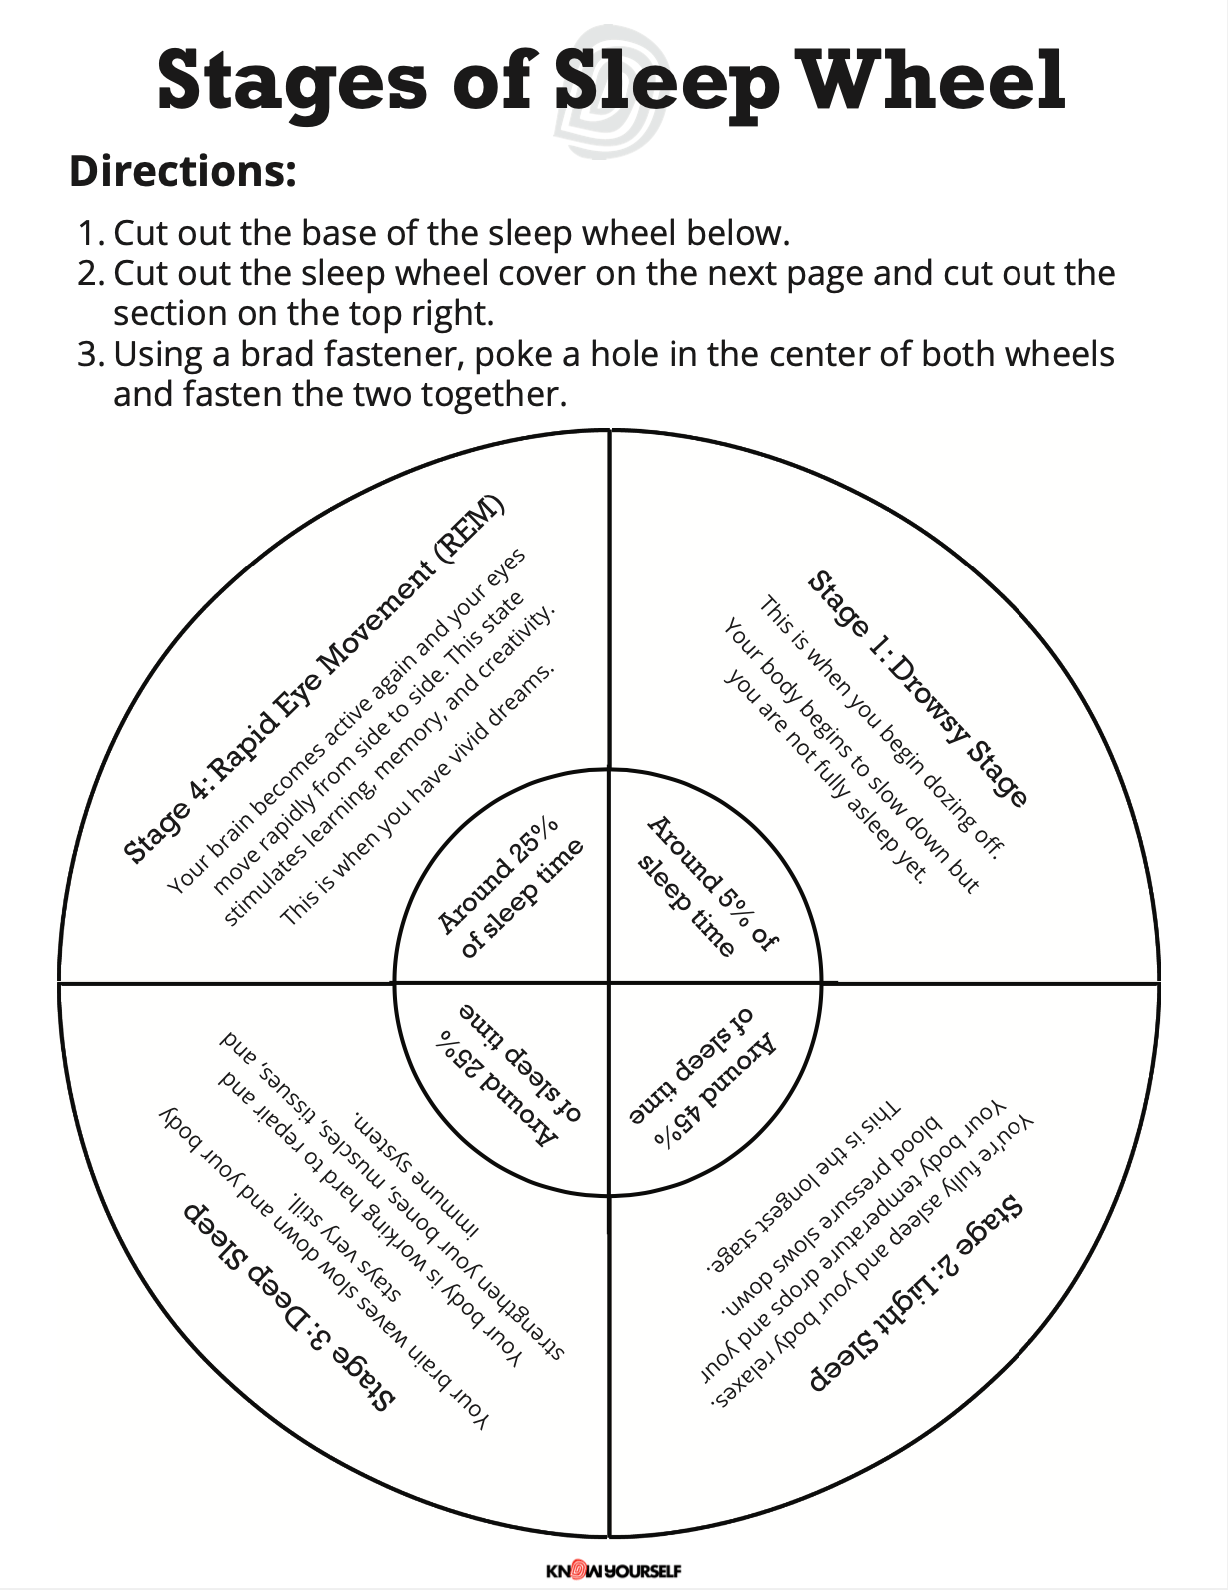 DIY Stages of Sleep Wheel Health Education for Children